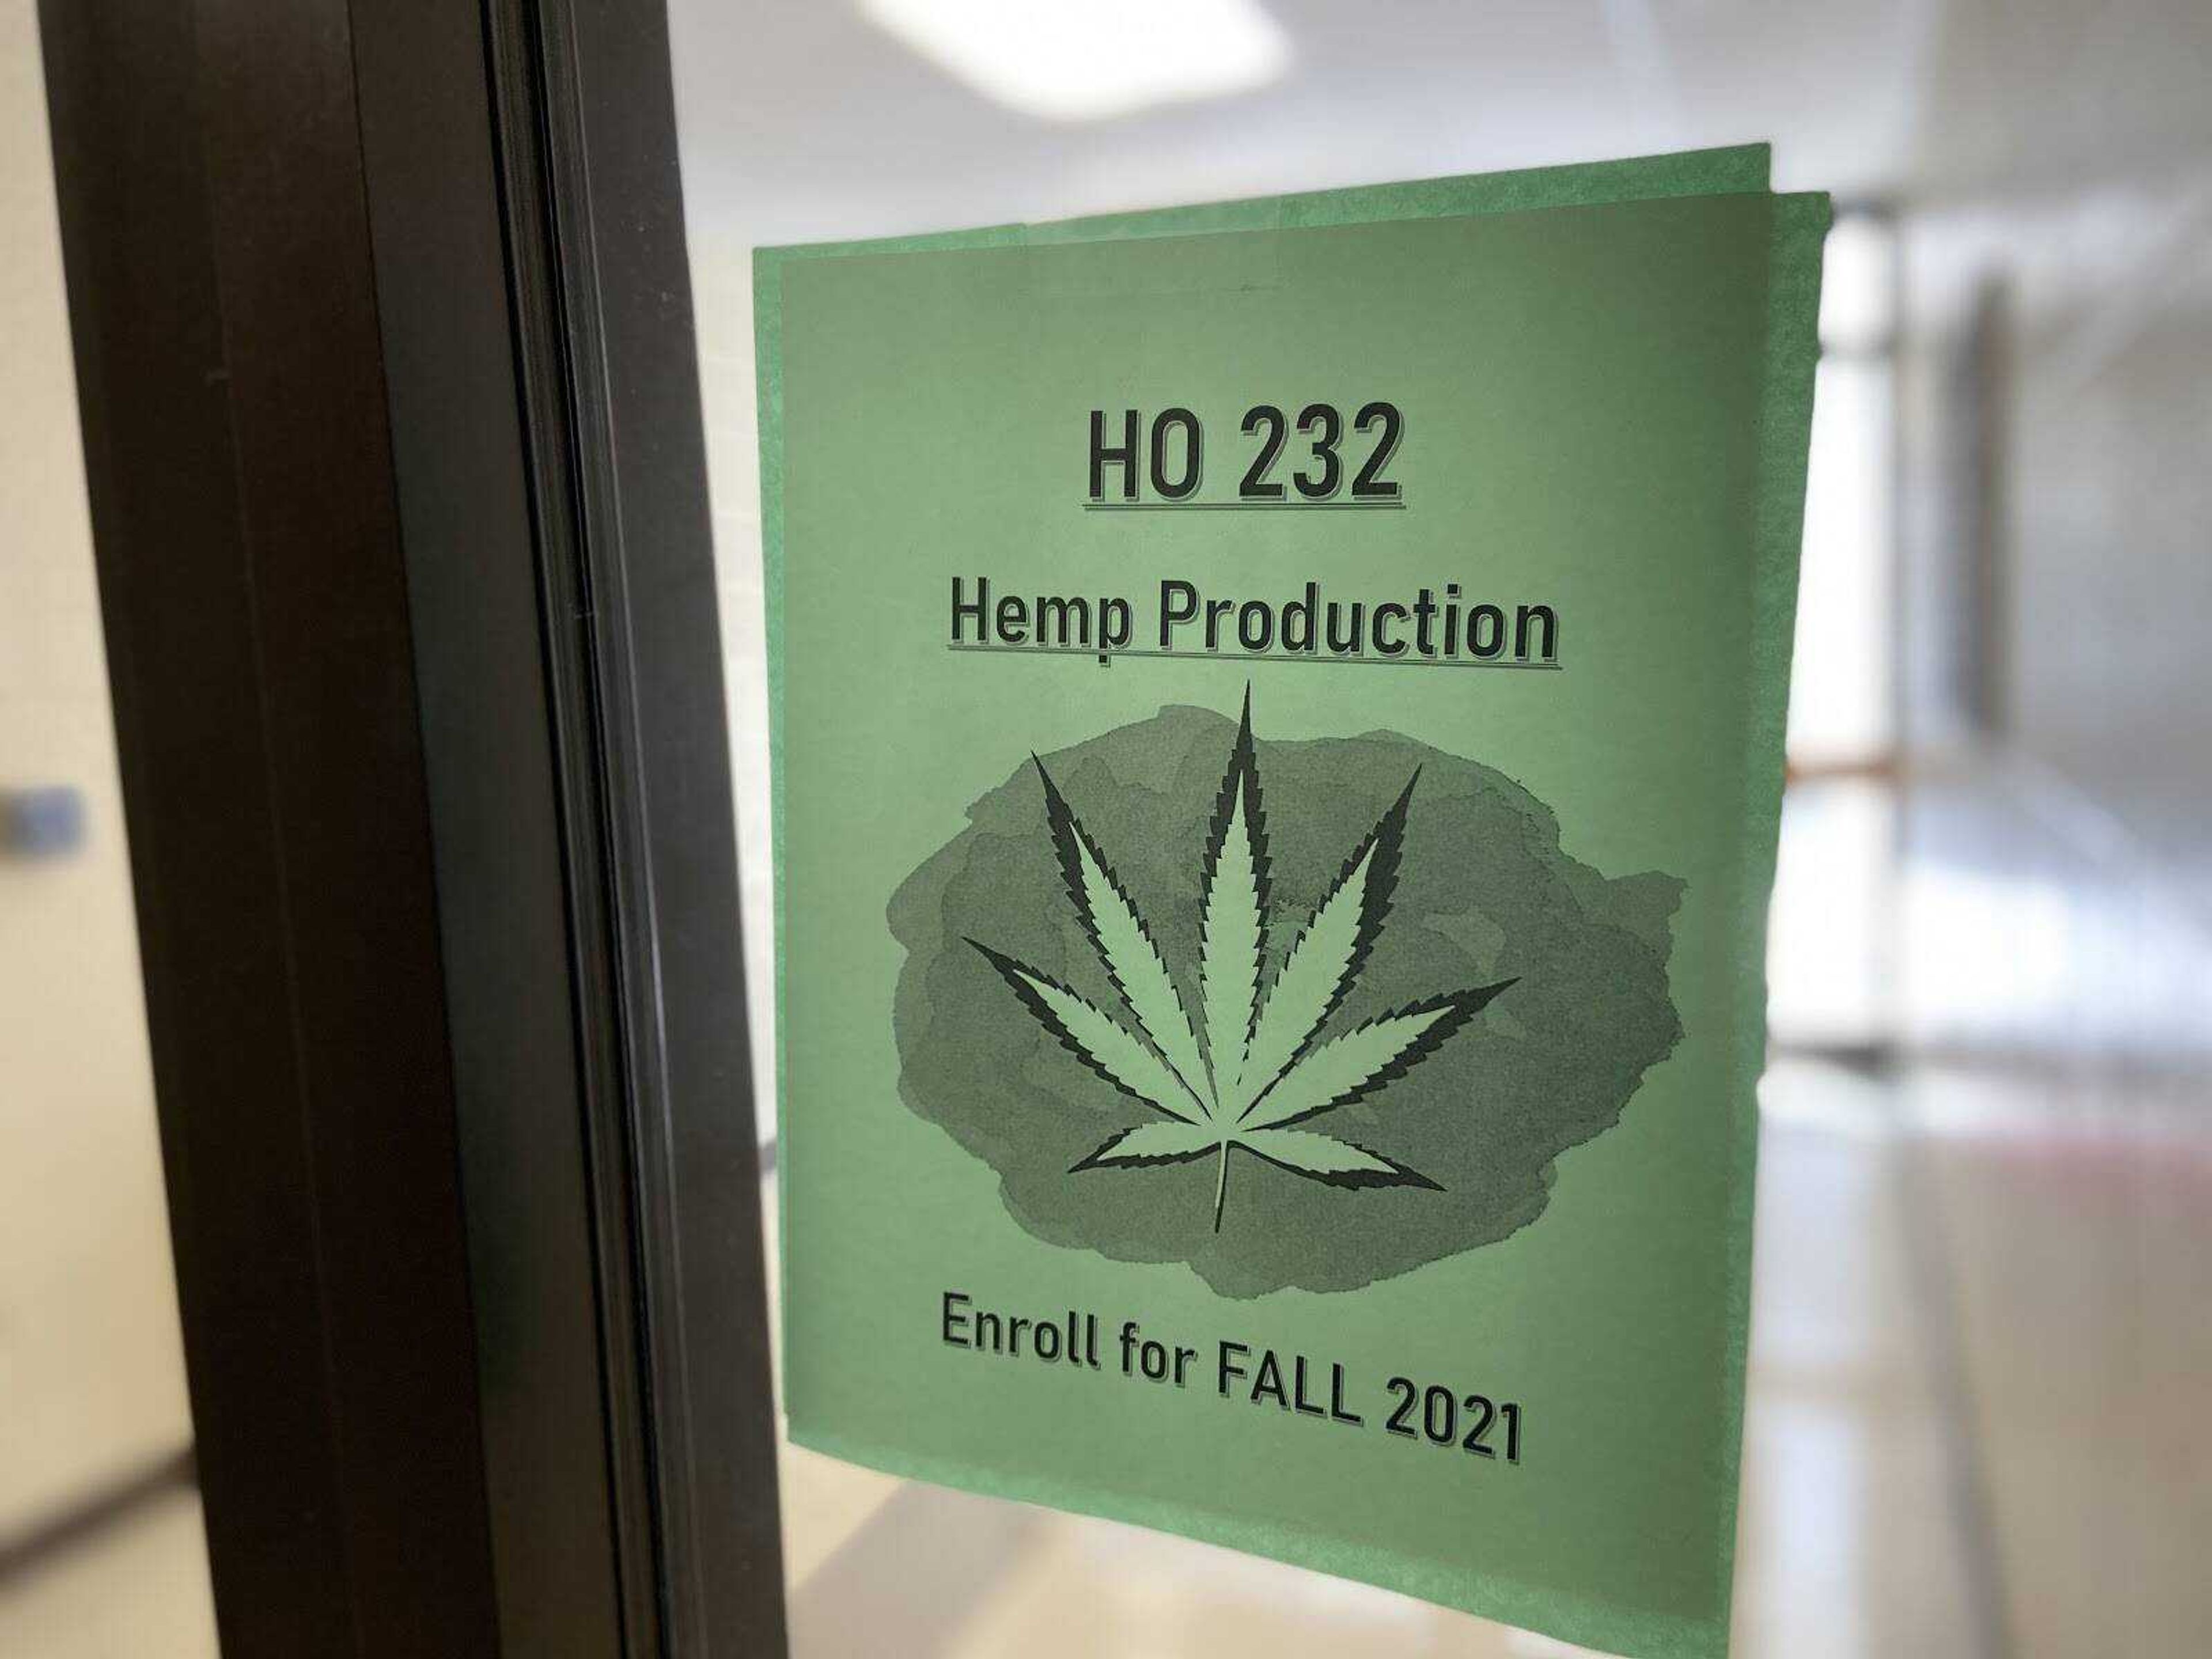 Flyer for HO232 Hemp Production class in Rhodes hall. The class will be offered to all students in Fall 2021.